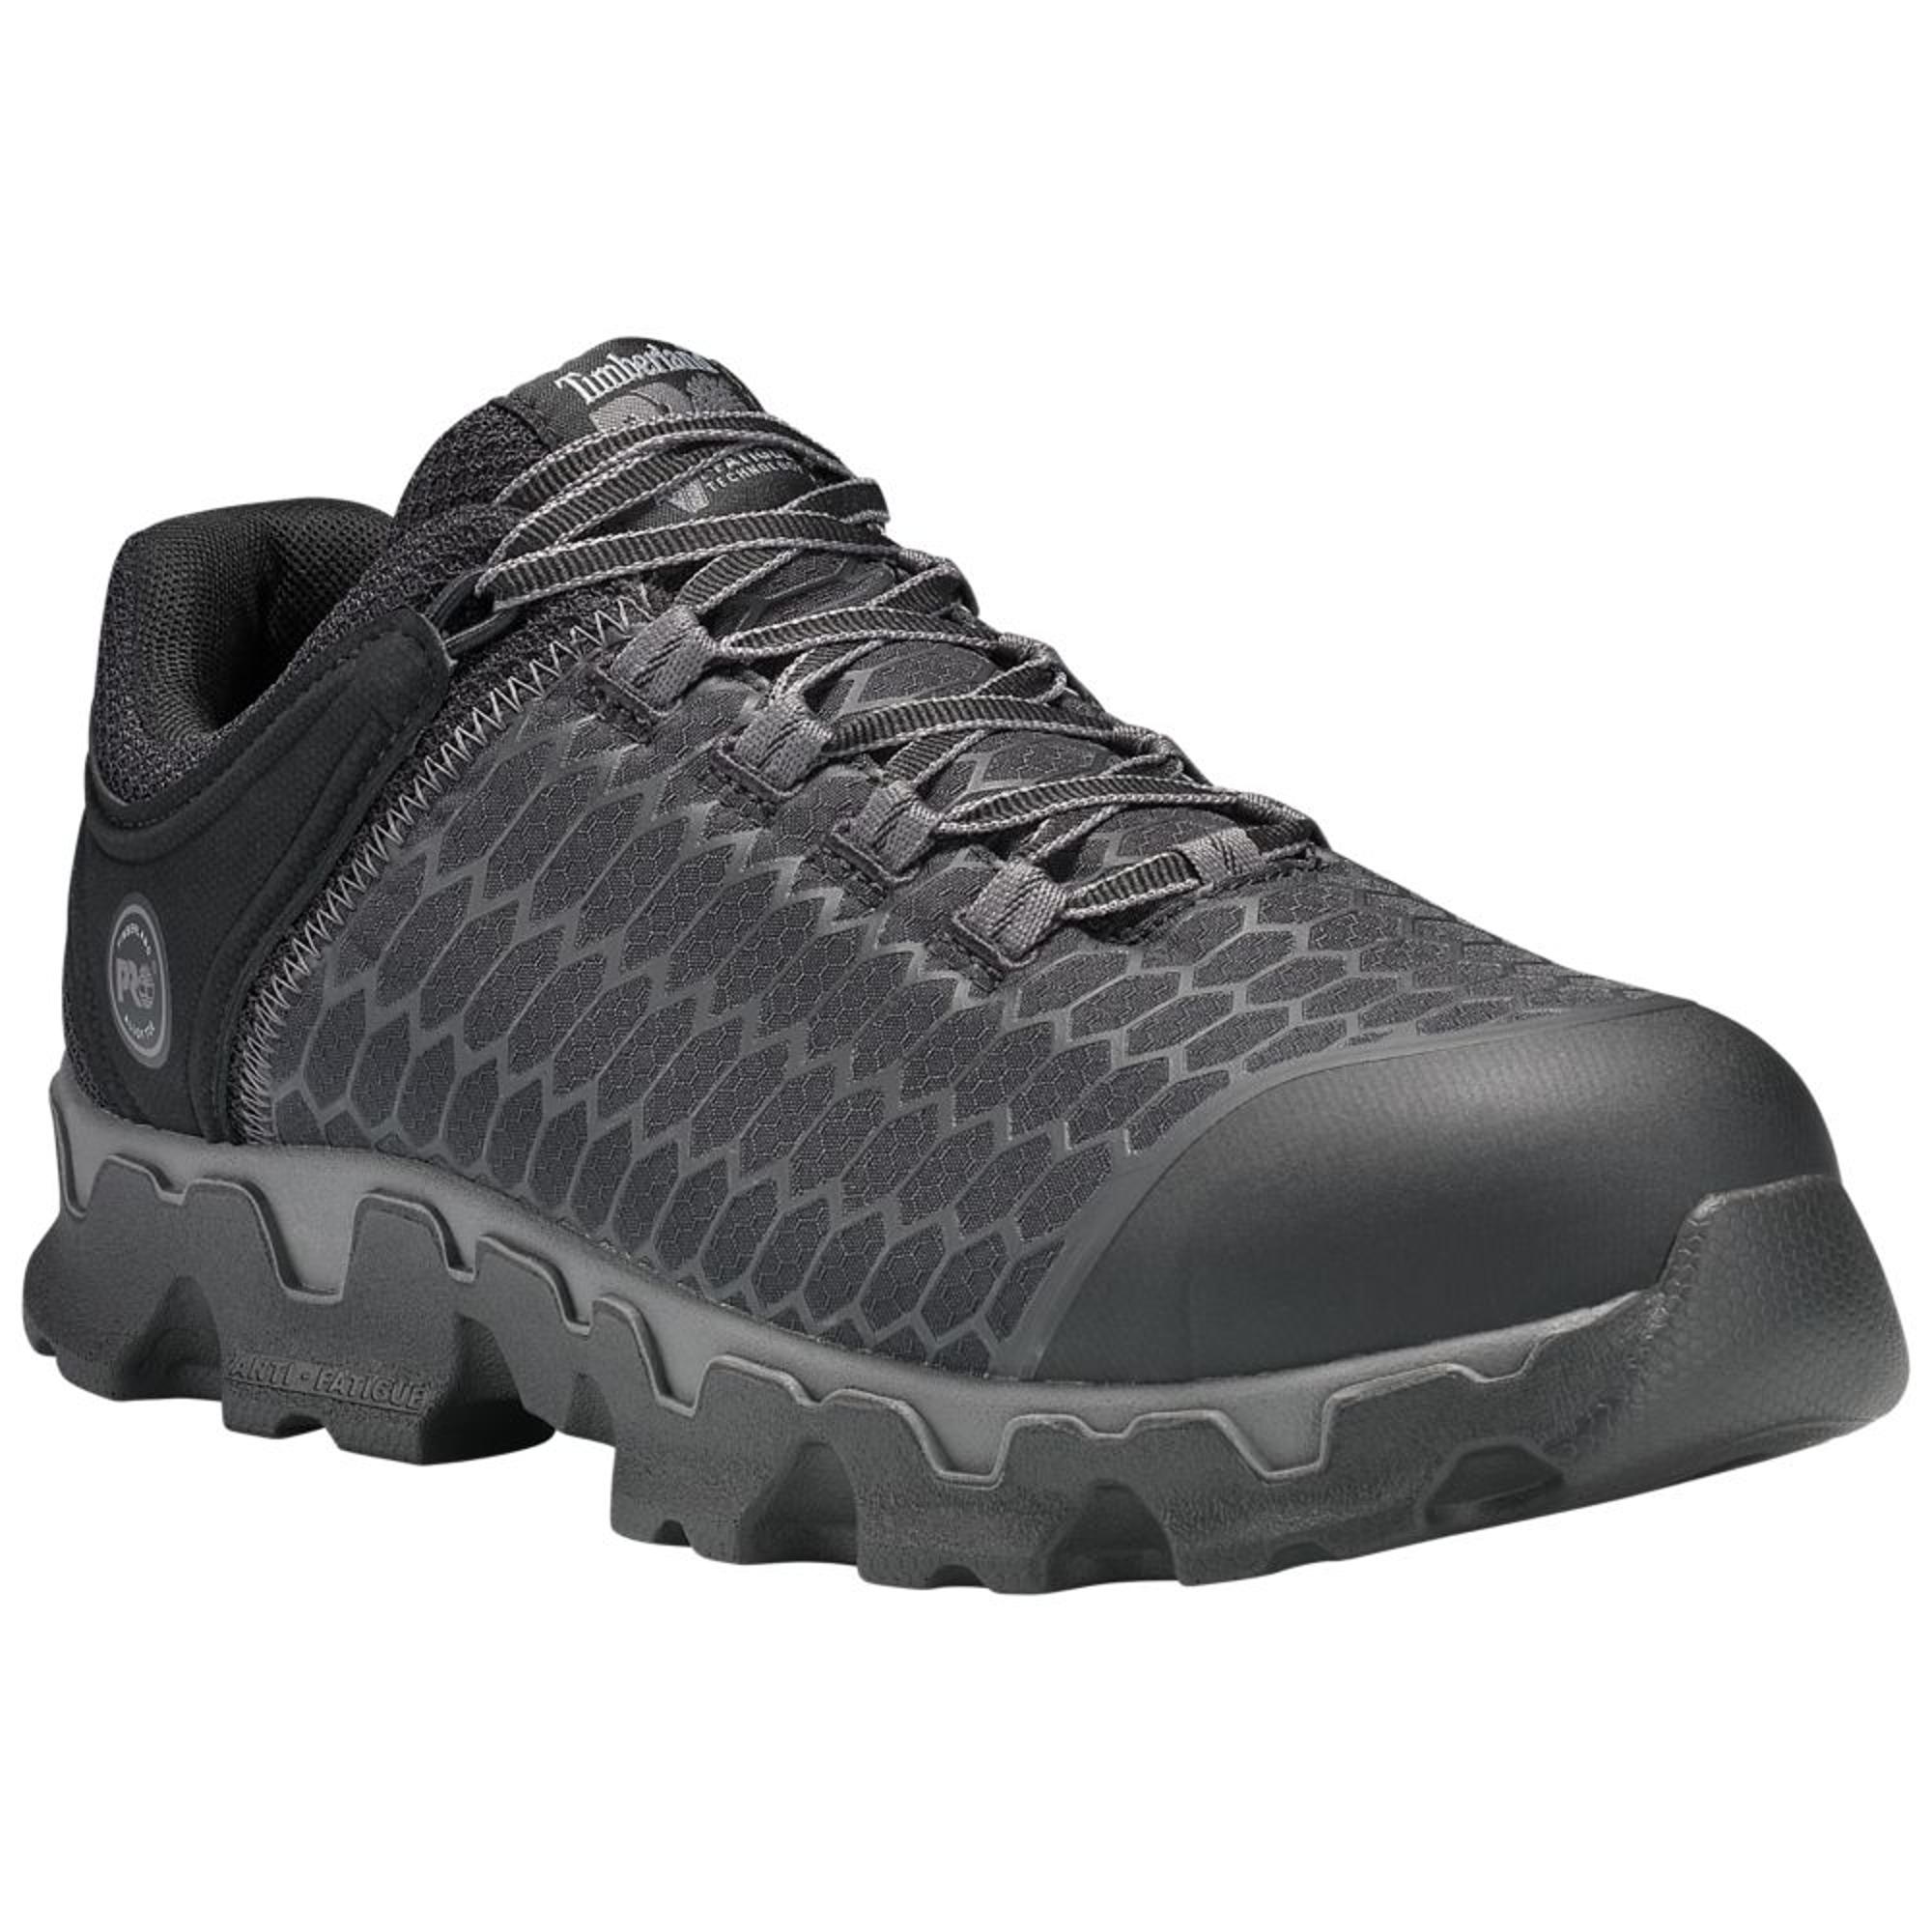 Timberland Powertrain Sport Alloy Toe Eh Work Shoes